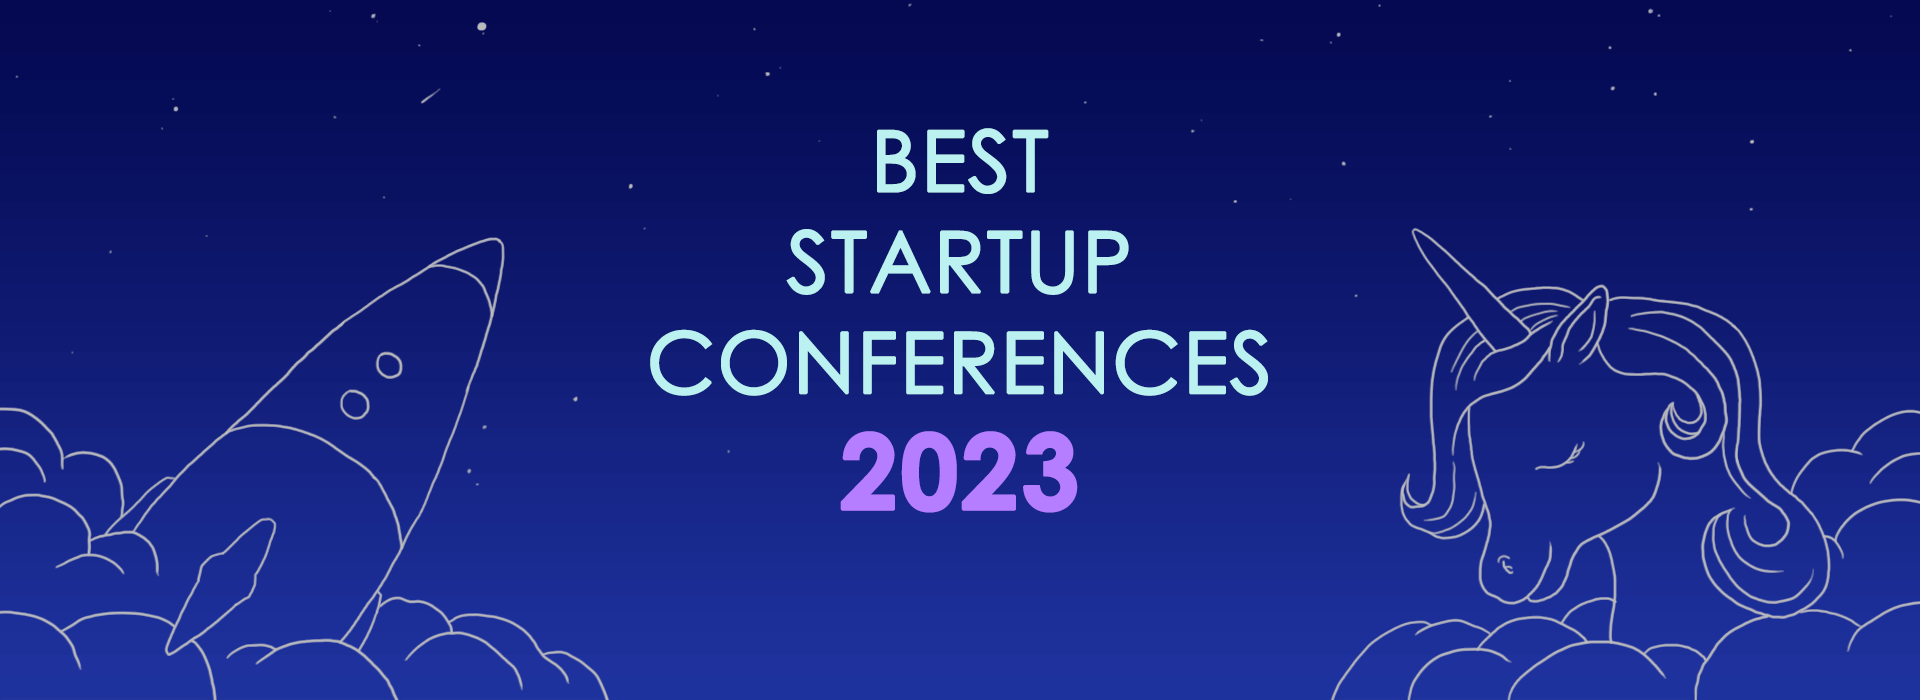 Best Startup Conferences and Events Worldwide 2023